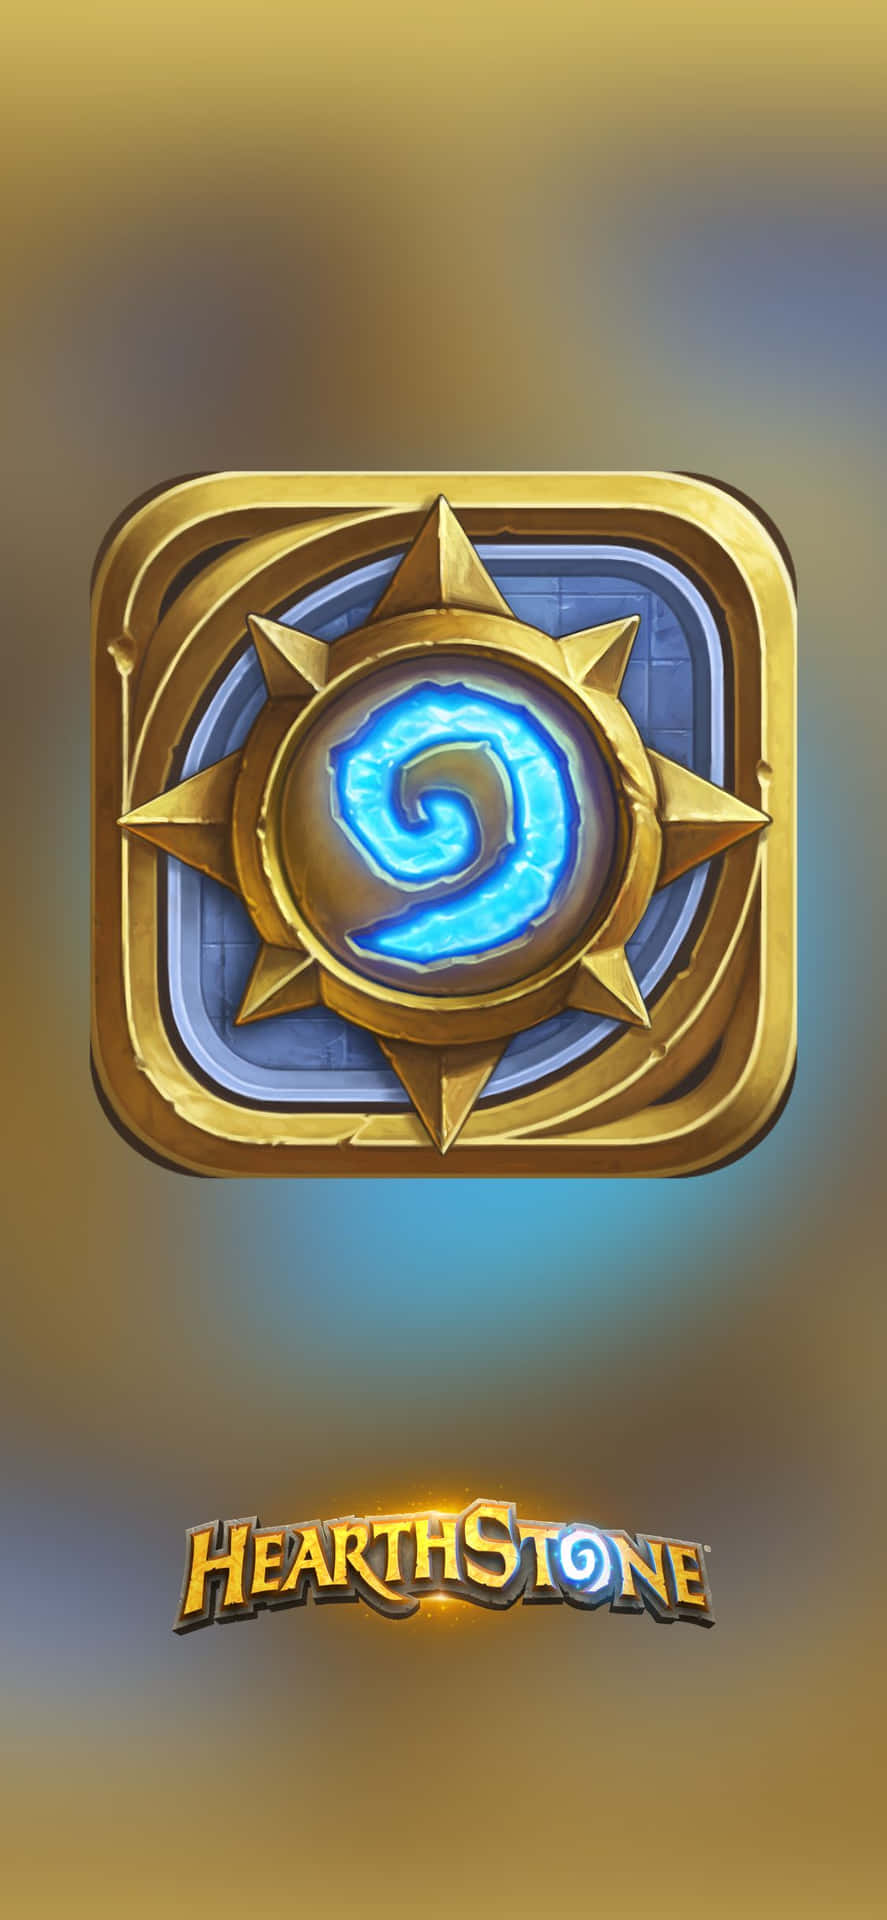 Iphone Xs Hearthstone Background Wallpaper